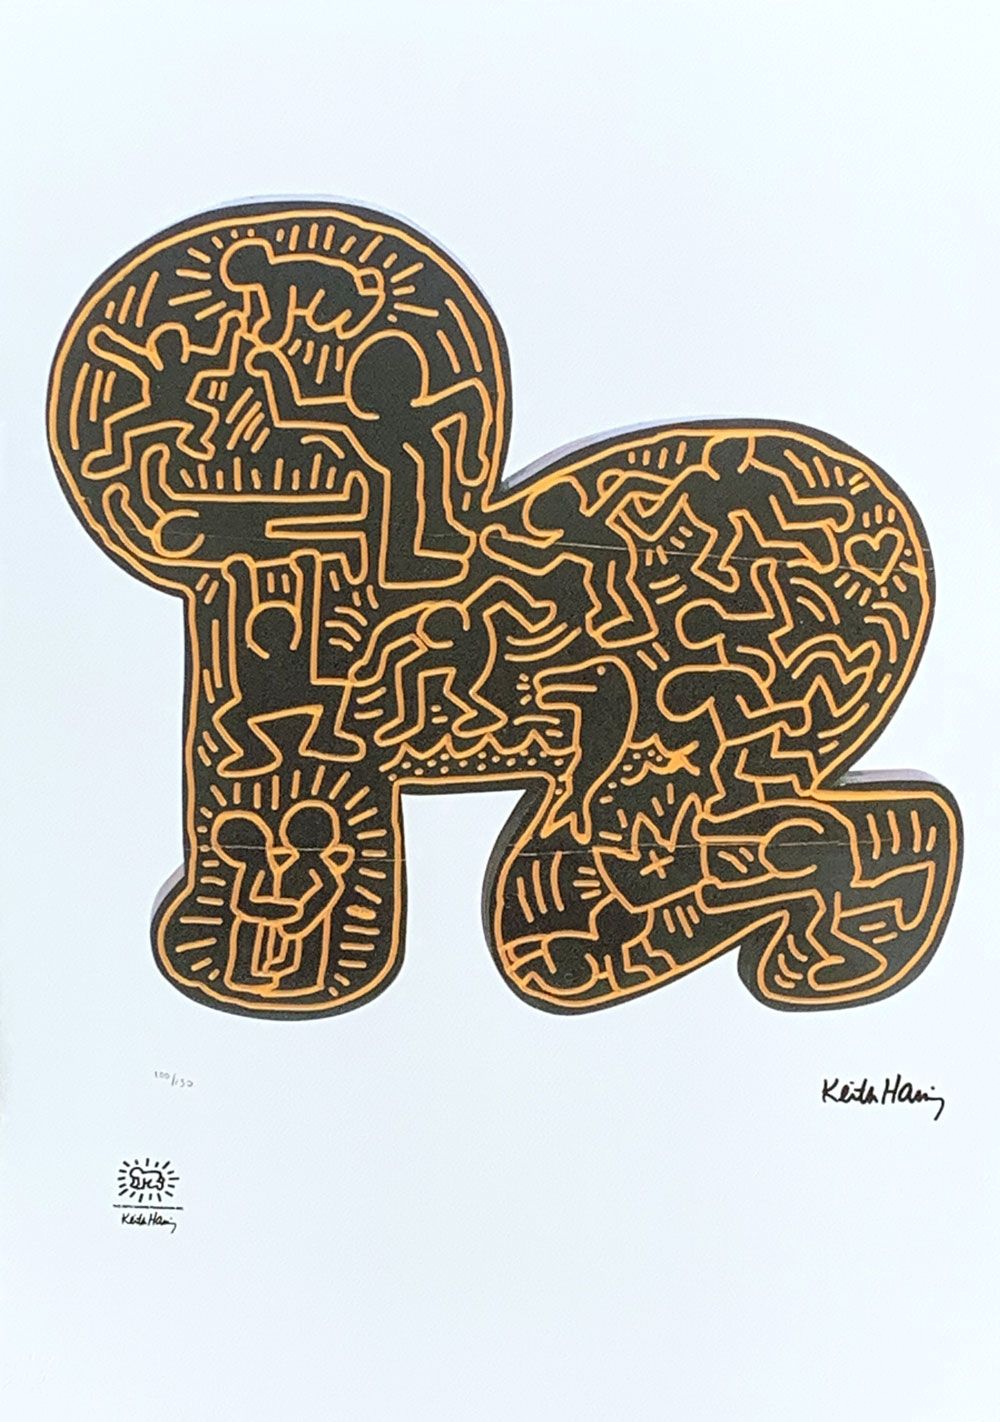 Keith Haring SERIGRAPHY "BABY" by Keith HARING (1958-1990)

Signed in the plate &hellip;